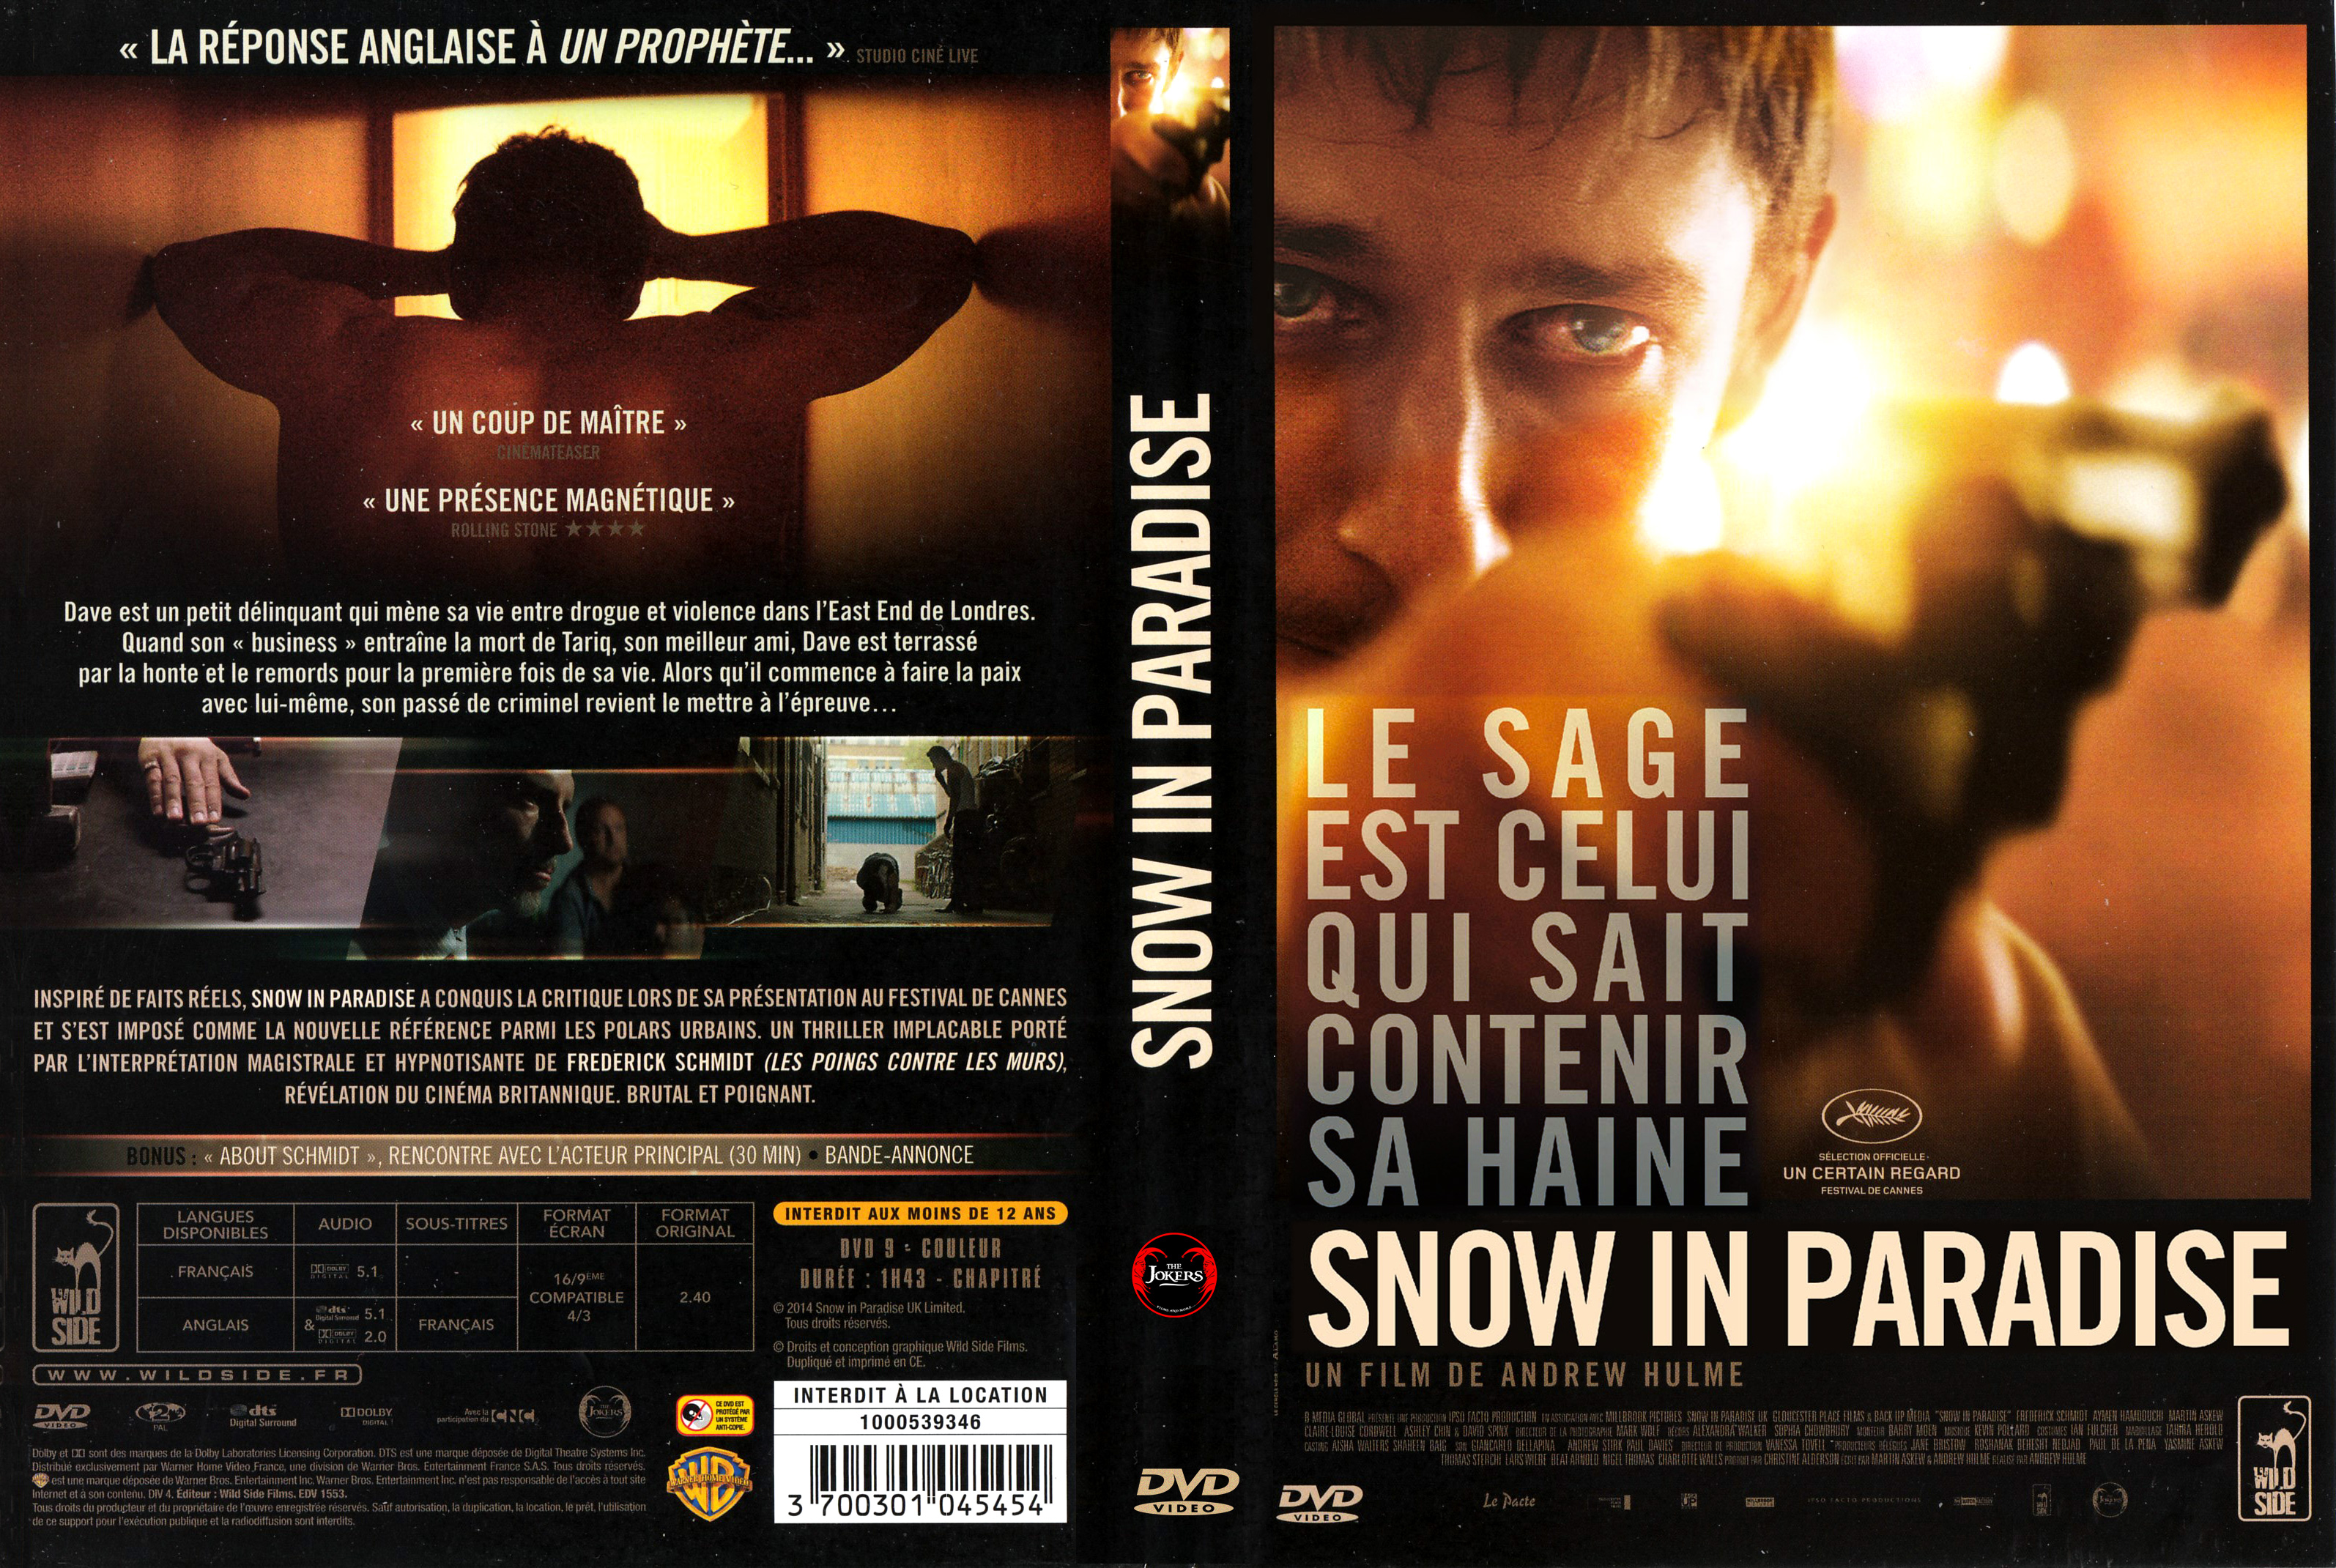 Jaquette DVD Snow in Paradise